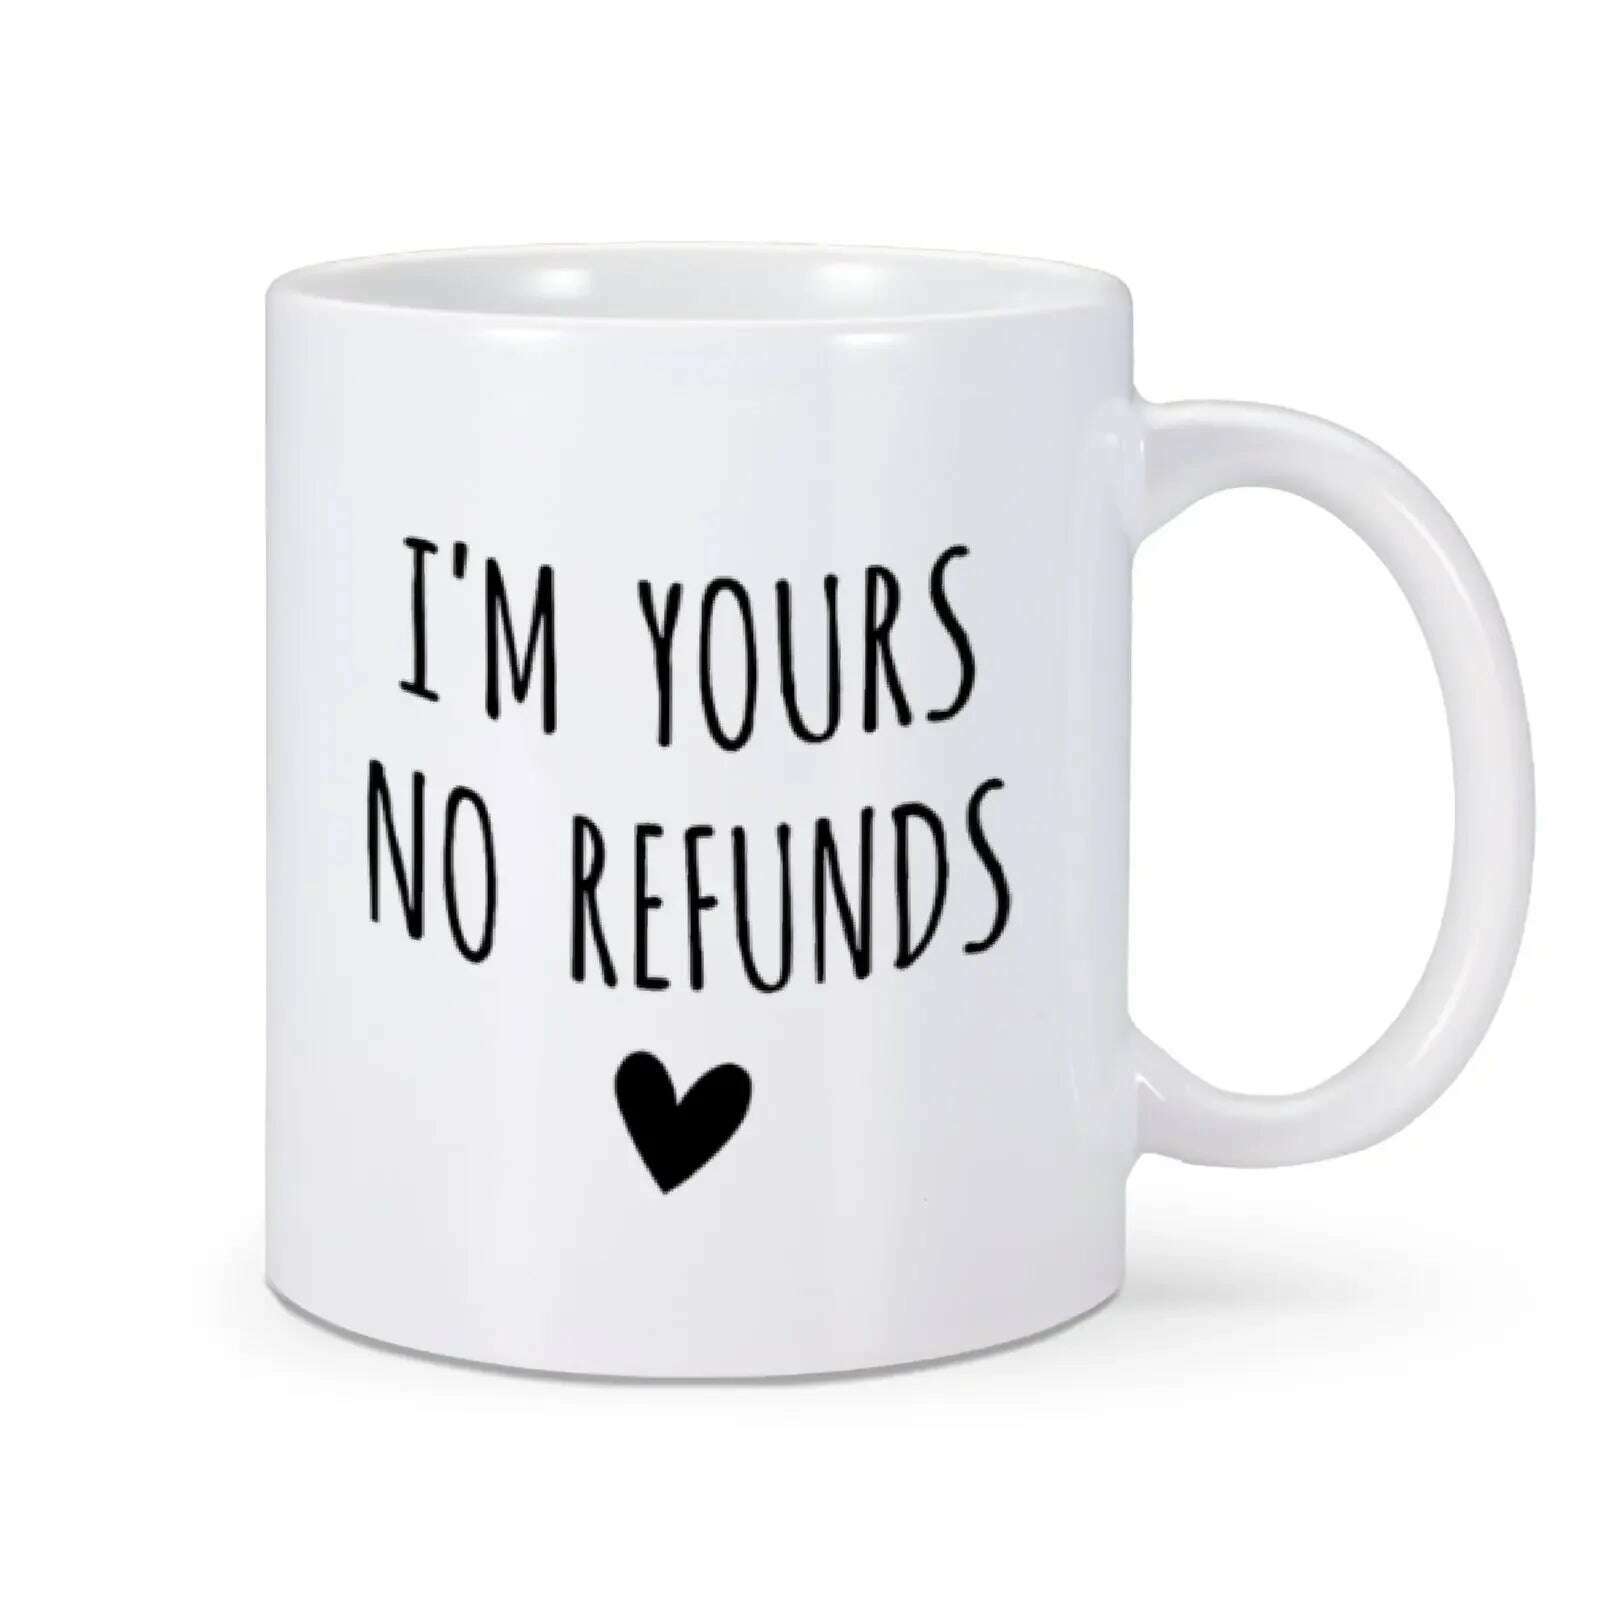 KIMLUD, I'm Yours No Refunds Mug Valentine's Day Mug Valentines Gift for Him Her Husband Wife Funny Coffee Cup for Women Men 11 Oz Mug, White / 11oz, KIMLUD Womens Clothes